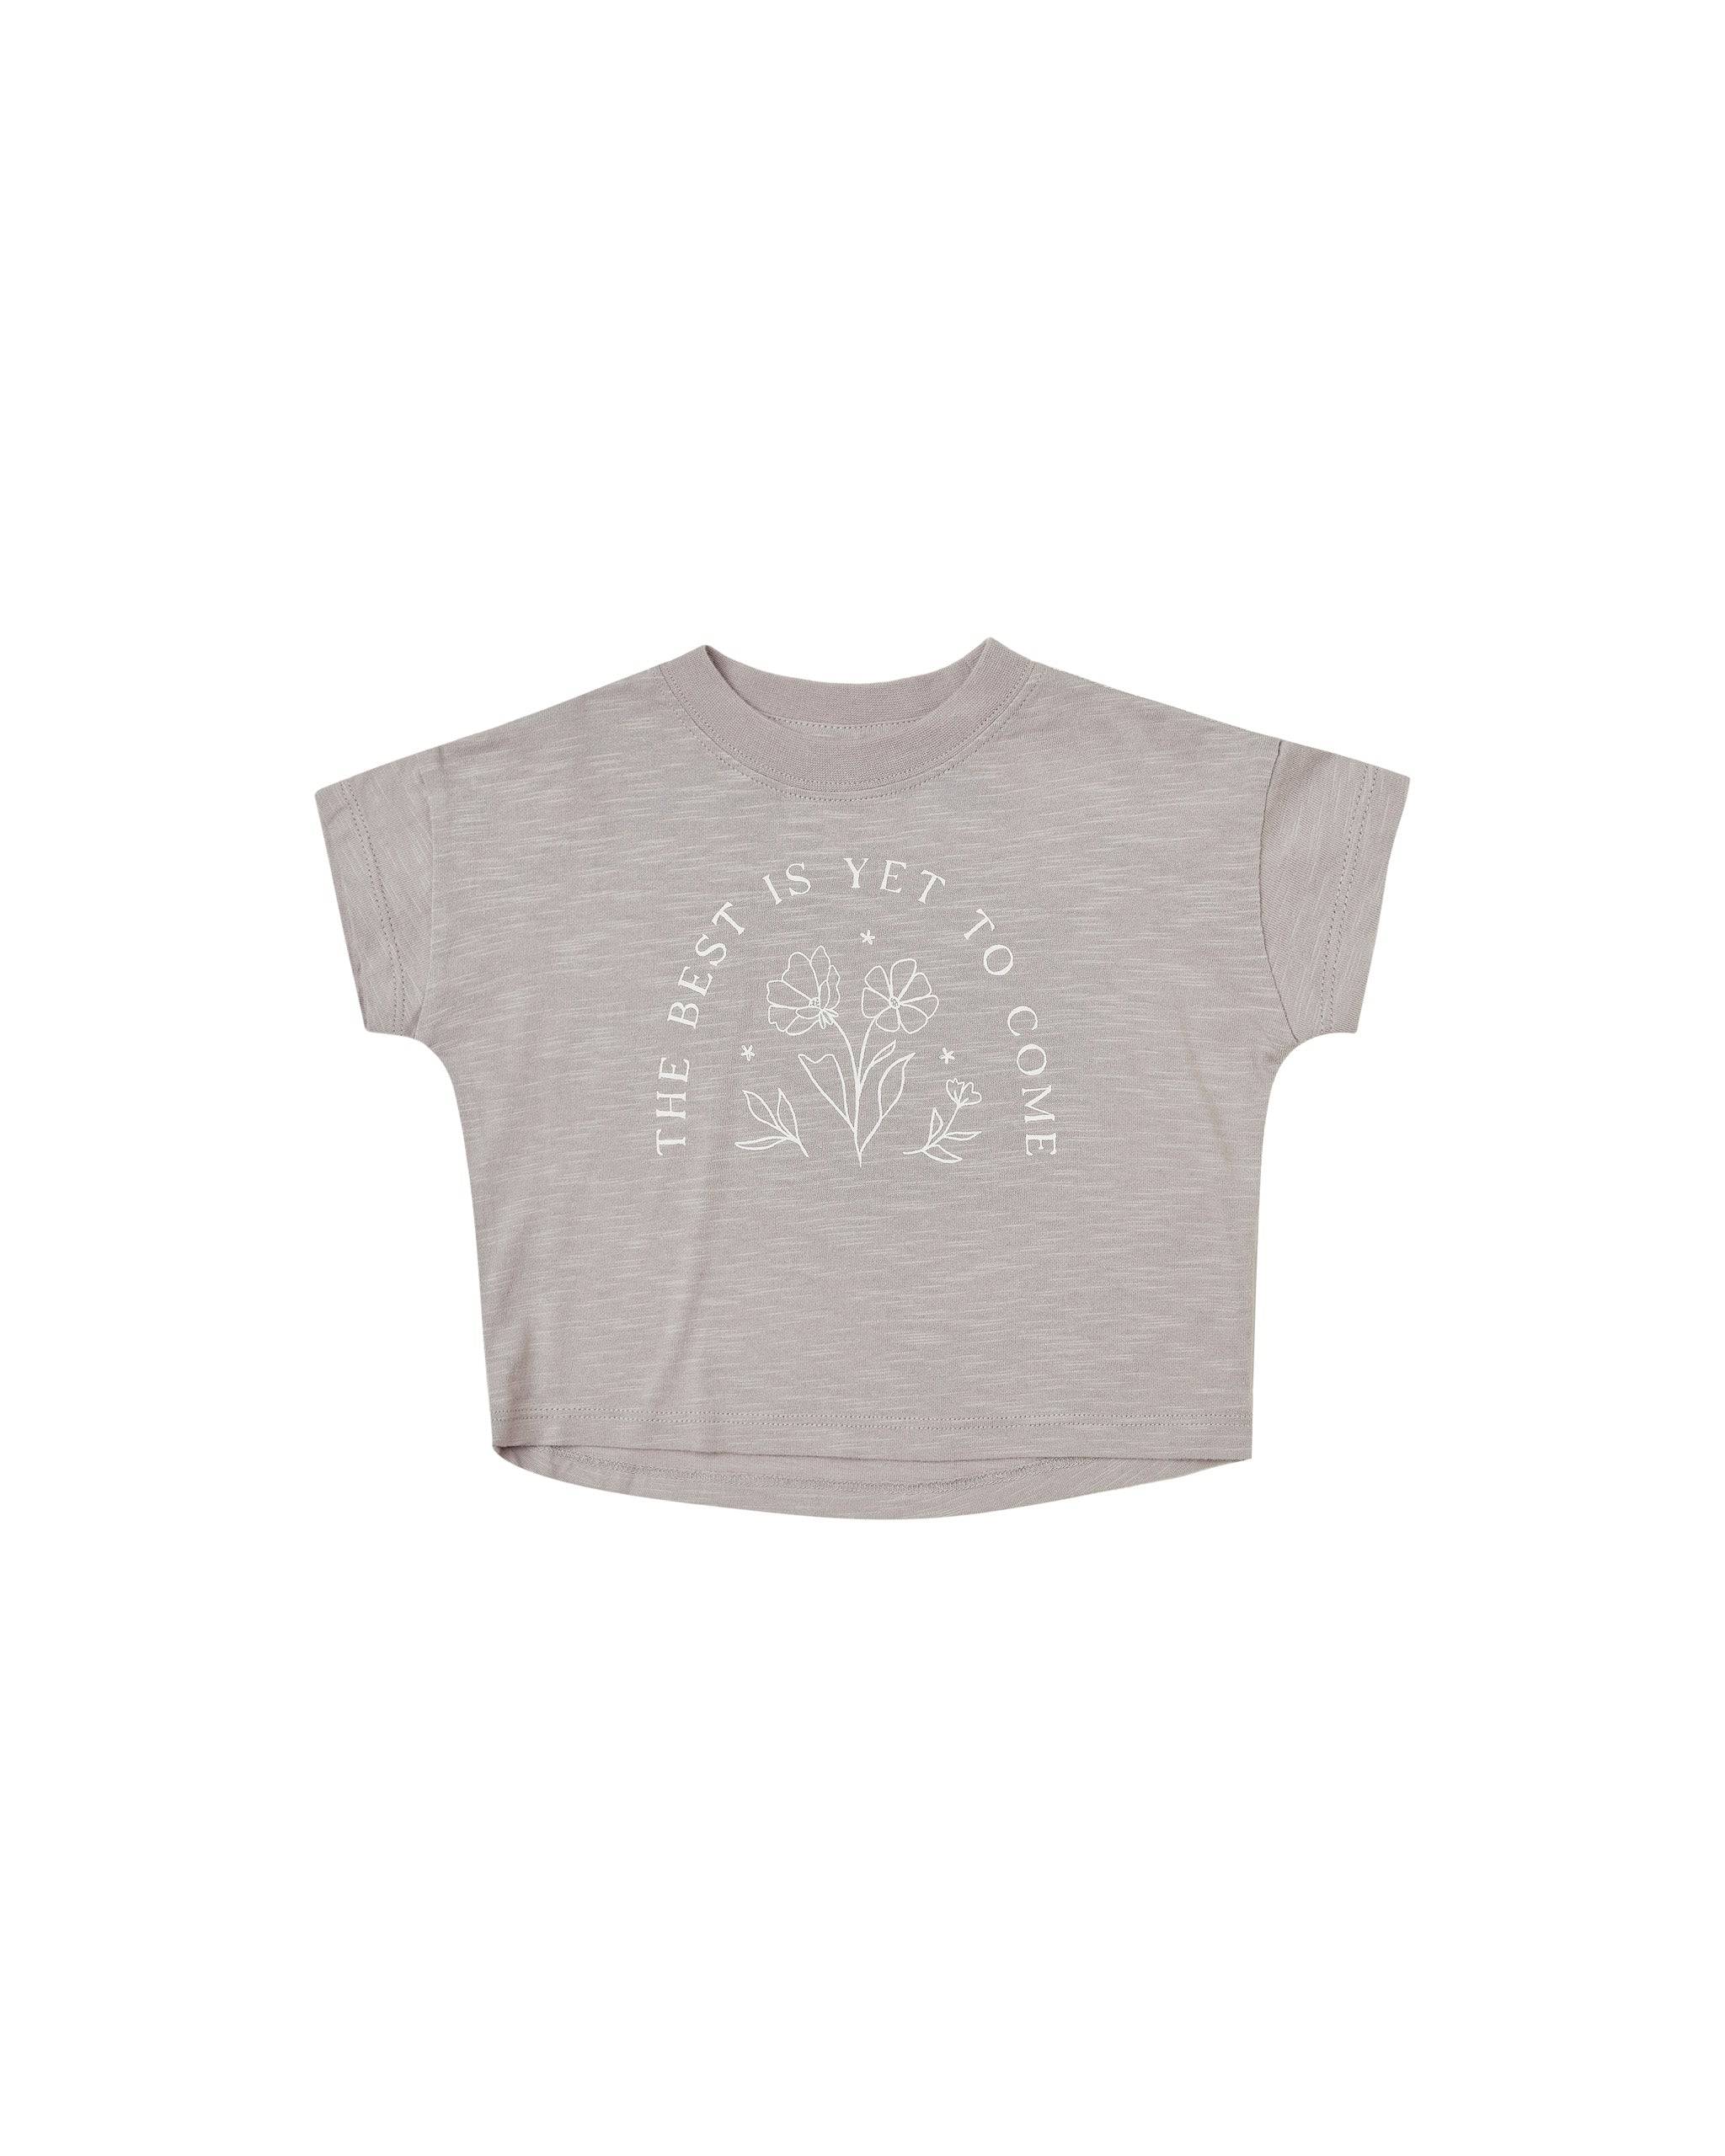 Rylee + Cru The Best is Yet to Come Boxy Tee - Twinkle Twinkle Little One